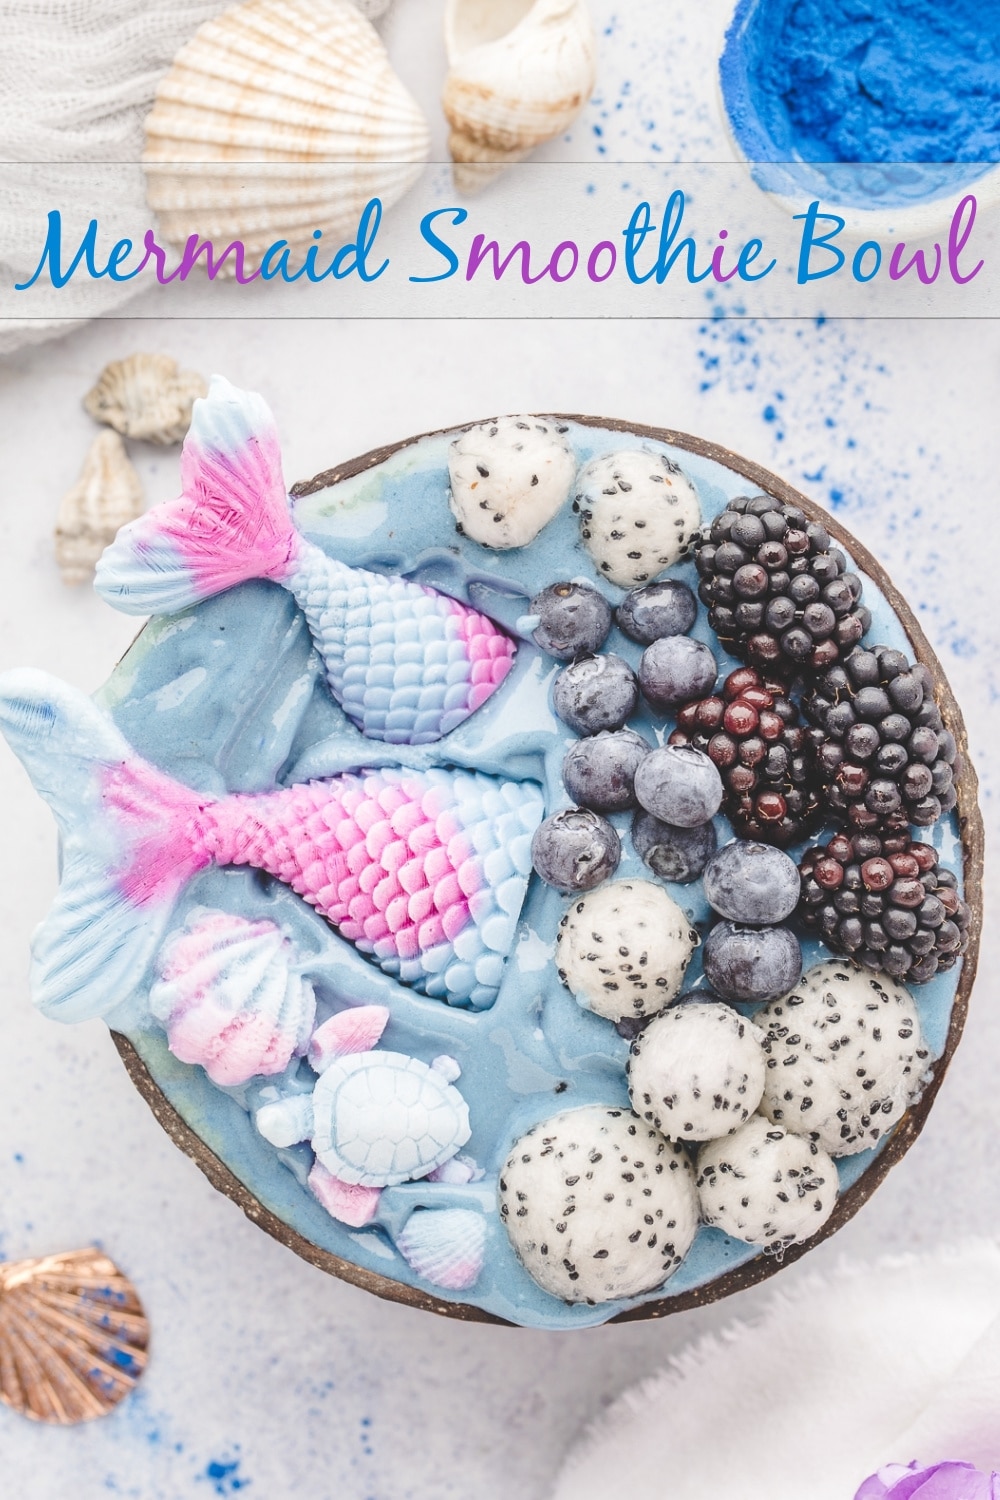 Dive into a mermaid adventure with this Mermaid Smoothie Bowl! Perfect for mermaid themed parties and little mermaid enthusiasts, this magical creation features a swirl of blue spirulina superfoods goodness. The DIY mermaid tails, crafted from frozen yogurt and natural colorings, add a touch of whimsy to your mermaid party food spread. Get ready to make a splash at your next mermaid themed party with this easy-to-make and health-packed treat. Your little mermaid's dreams will come true.  via @cmpollak1